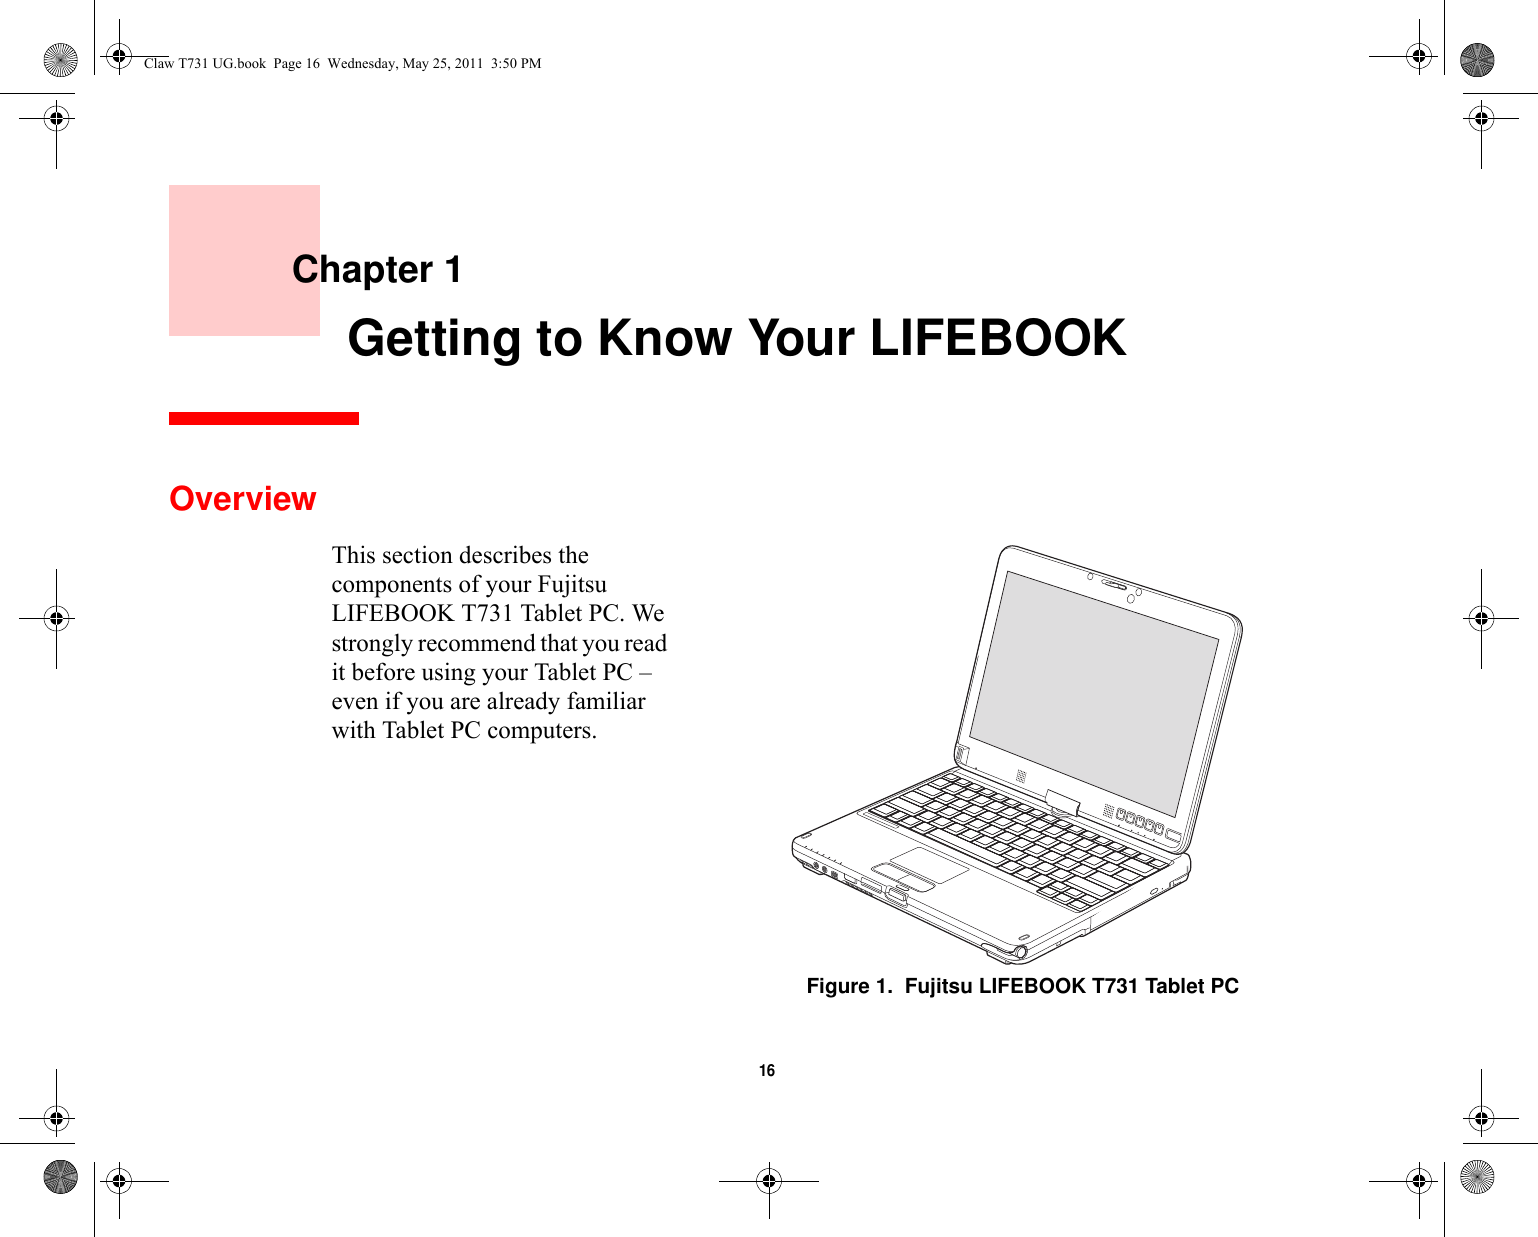 16     Chapter 1    Getting to Know Your LIFEBOOKOverviewThis section describes the components of your Fujitsu LIFEBOOK T731 Tablet PC. We strongly recommend that you read it before using your Tablet PC – even if you are already familiar with Tablet PC computers.Figure 1.  Fujitsu LIFEBOOK T731 Tablet PCClaw T731 UG.book  Page 16  Wednesday, May 25, 2011  3:50 PM